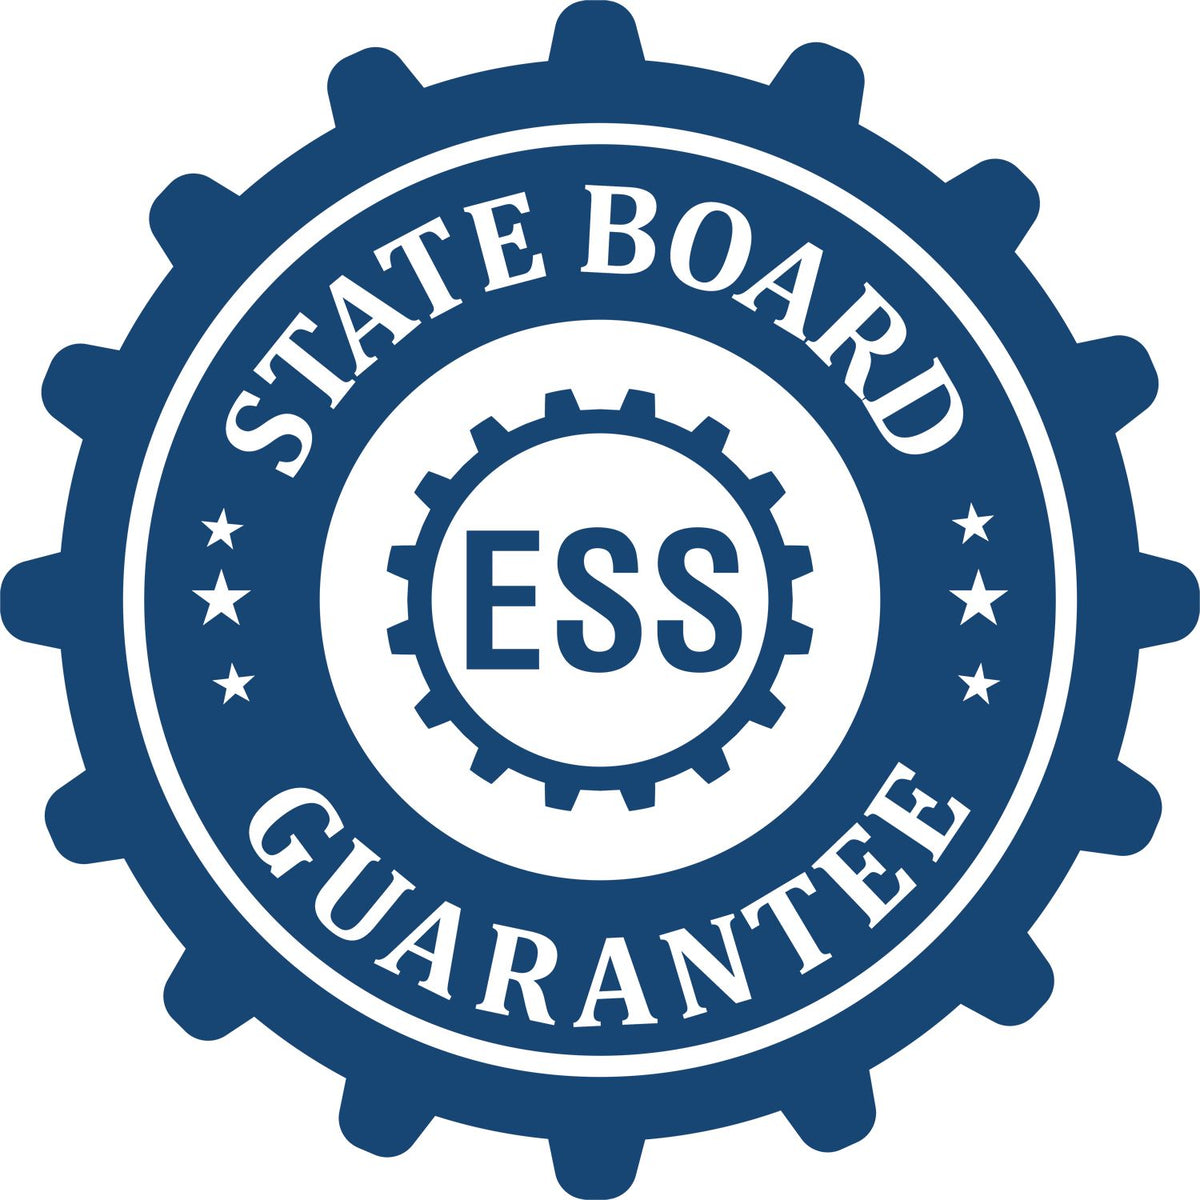 An emblem in a gear shape illustrating a state board guarantee for the State of District of Columbia Extended Long Reach Geologist Seal